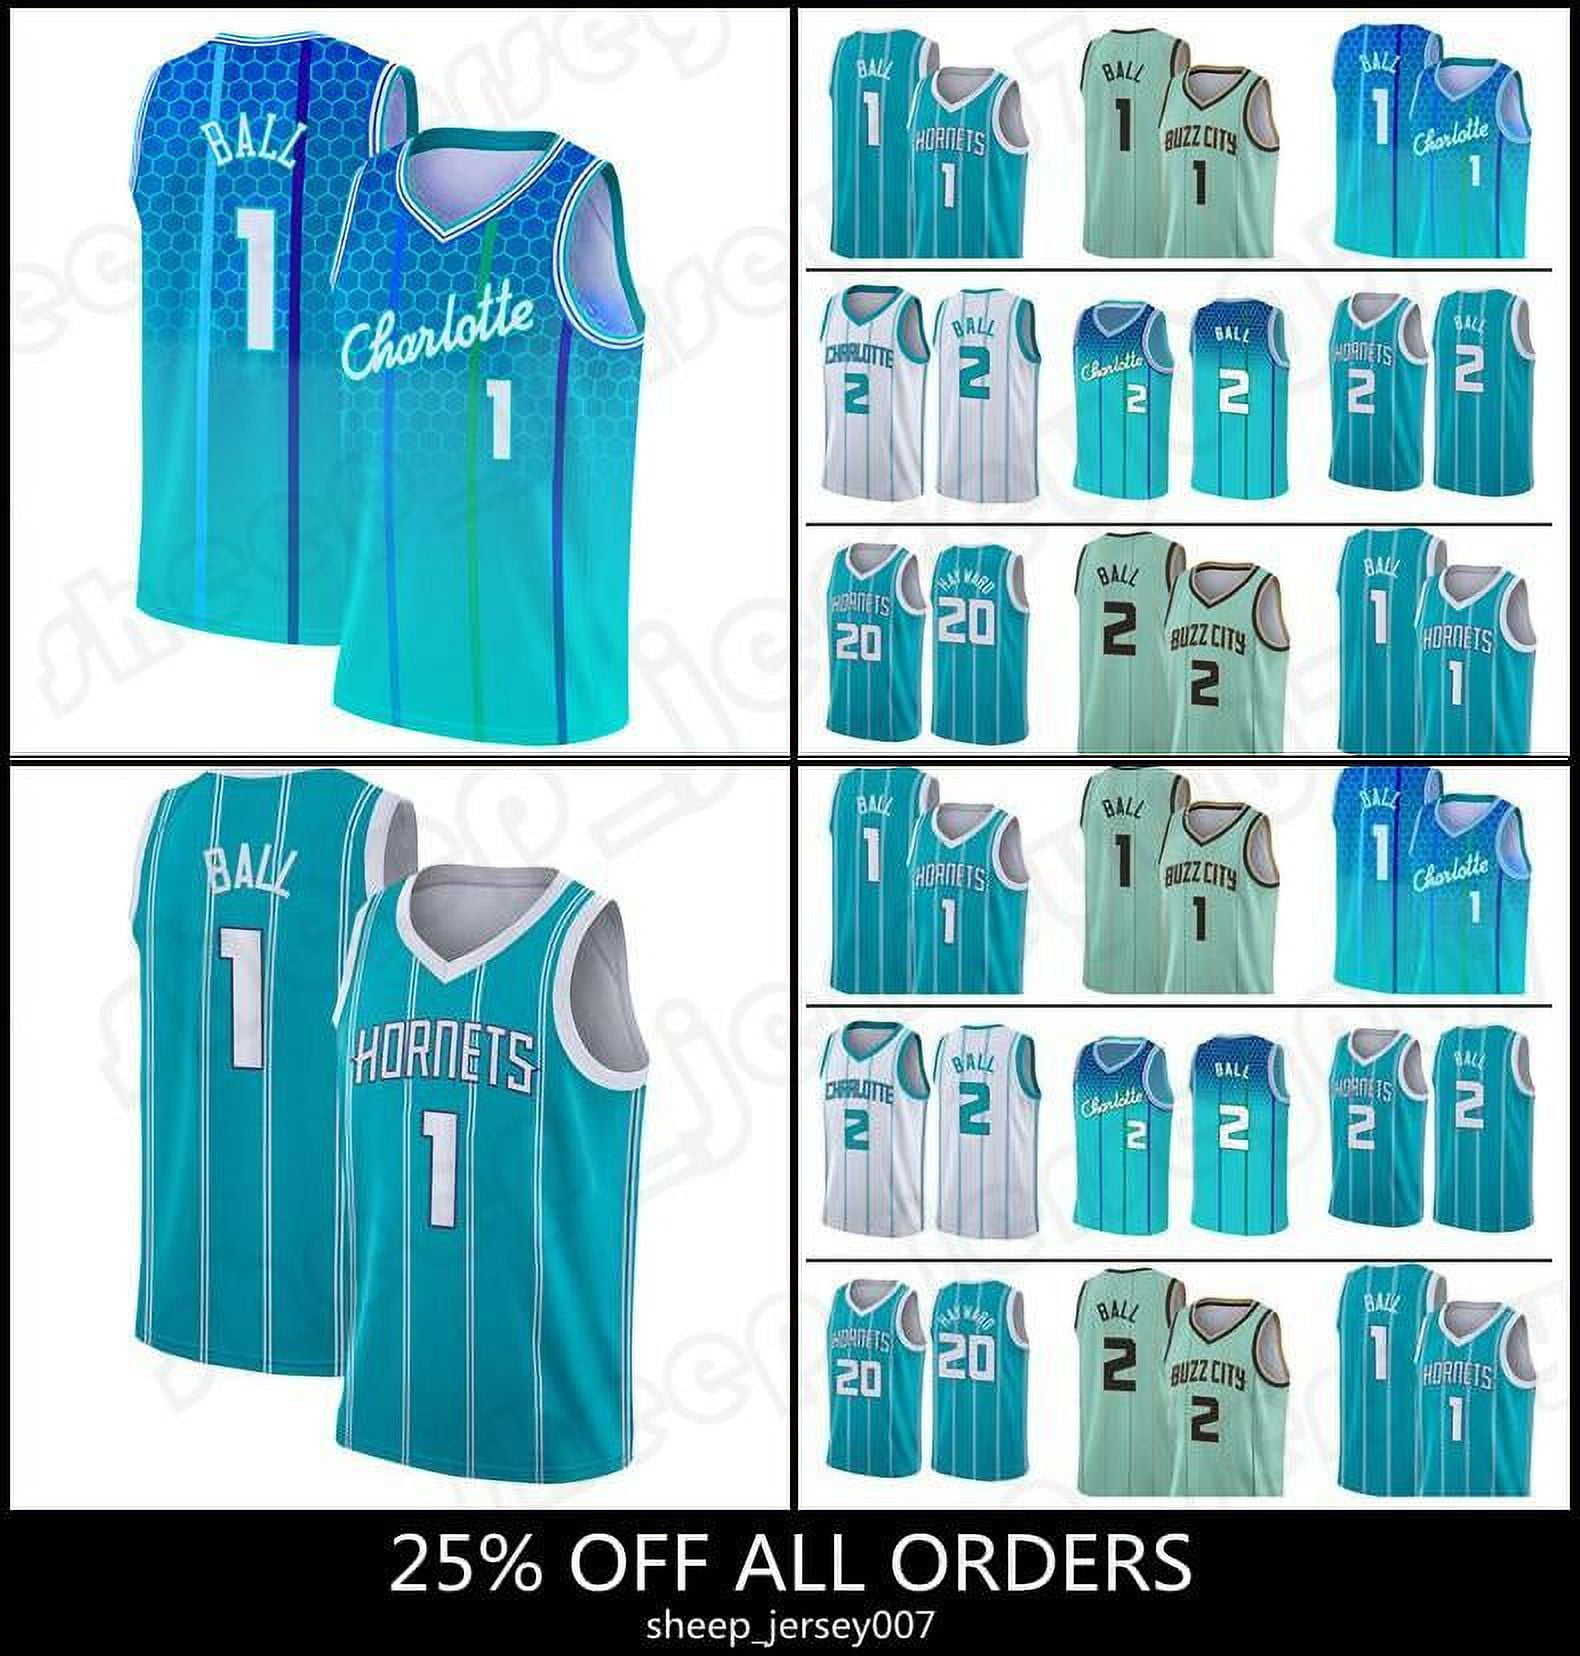  Charlotte Hornets Basketball Jersey Basketball T-Shirt  Sportswear Top and Bottom Set #2 Adult and Kids Practice Clothes (E,XL) :  Clothing, Shoes & Jewelry